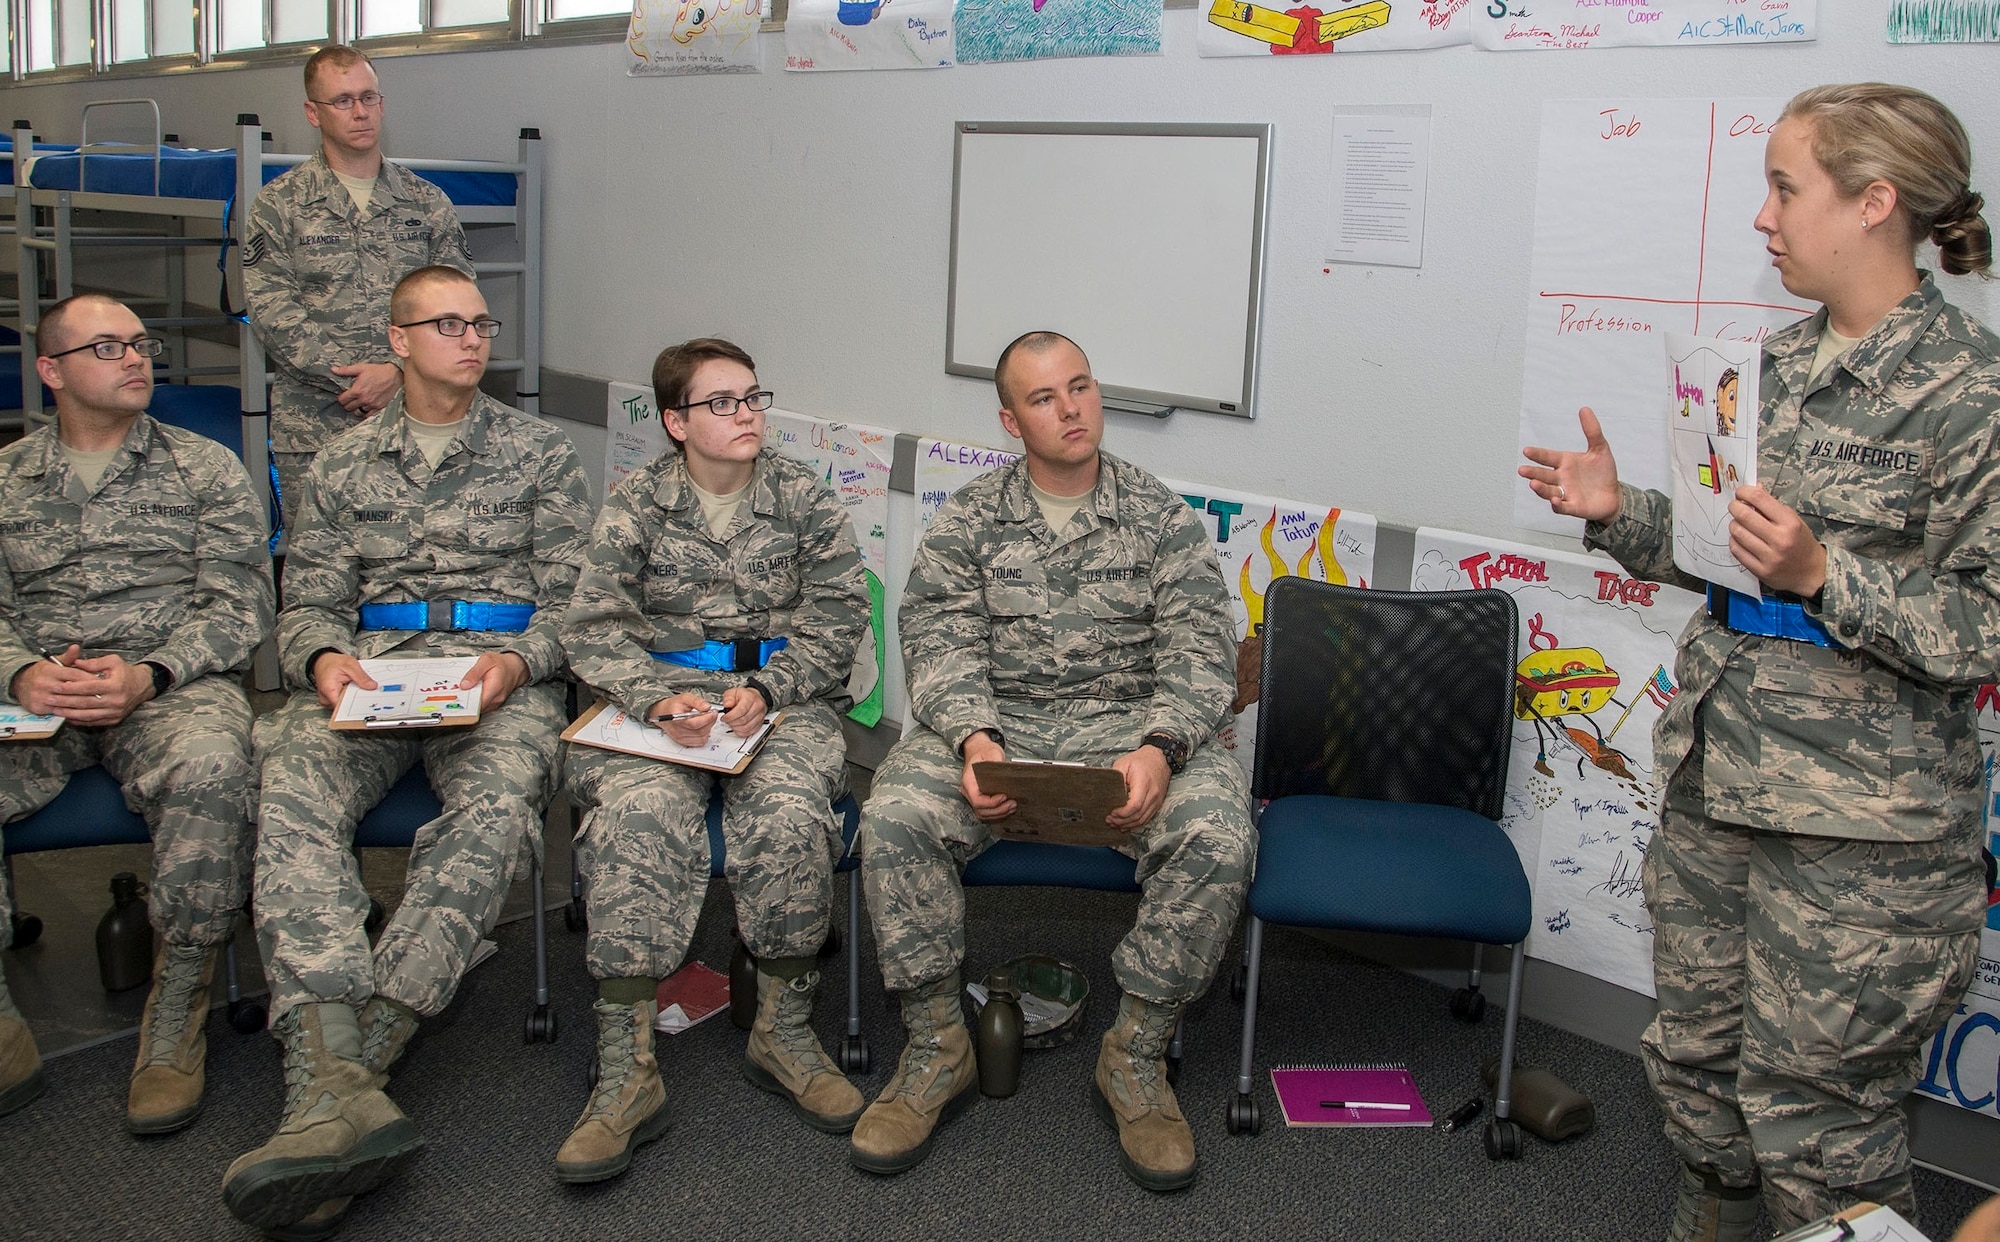 Tech Sgt. Alexander assists Airmen as they lead their own discussion during Airman's Week, an important part of their integration into the Air Force.